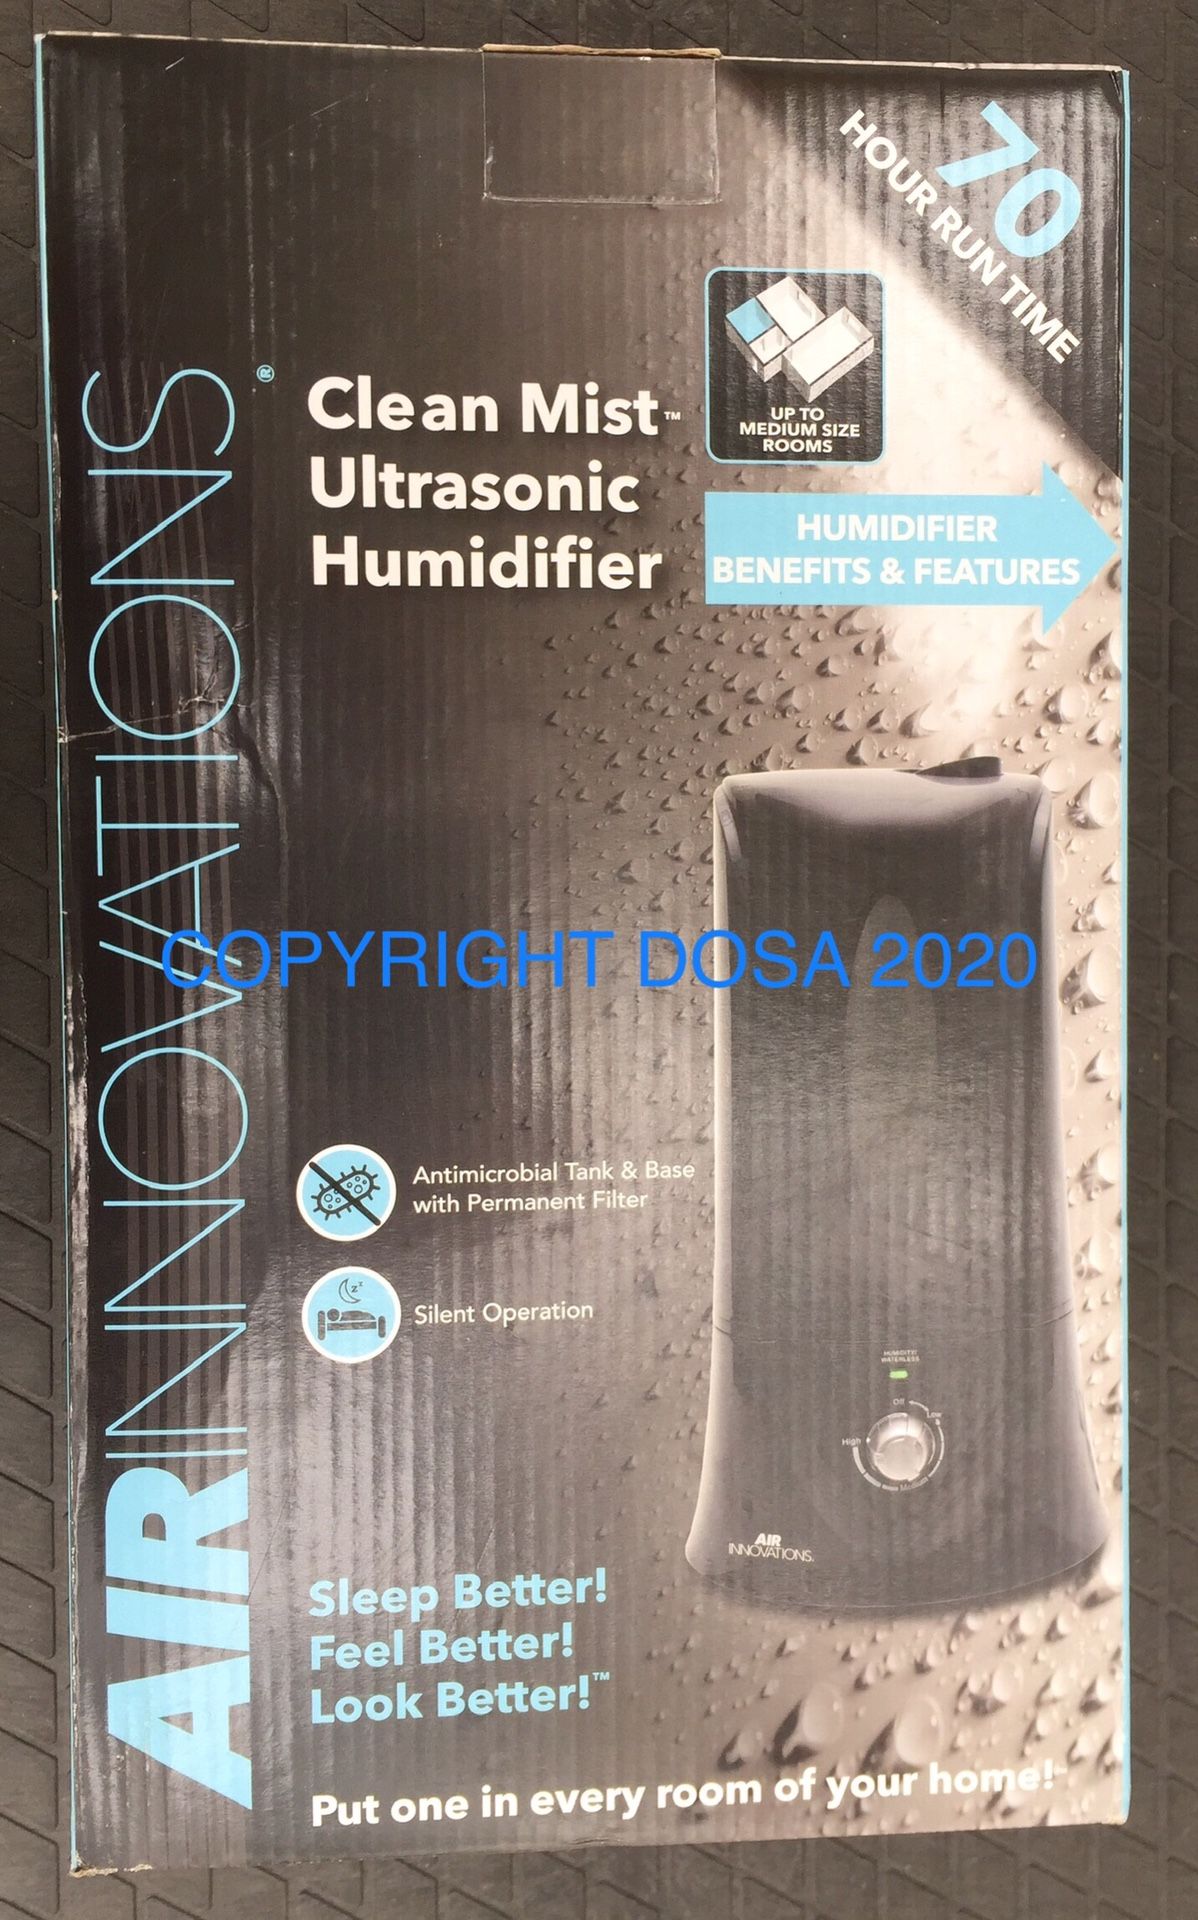 Air Innovations Clean Mist Smart Humidifier, MH-408